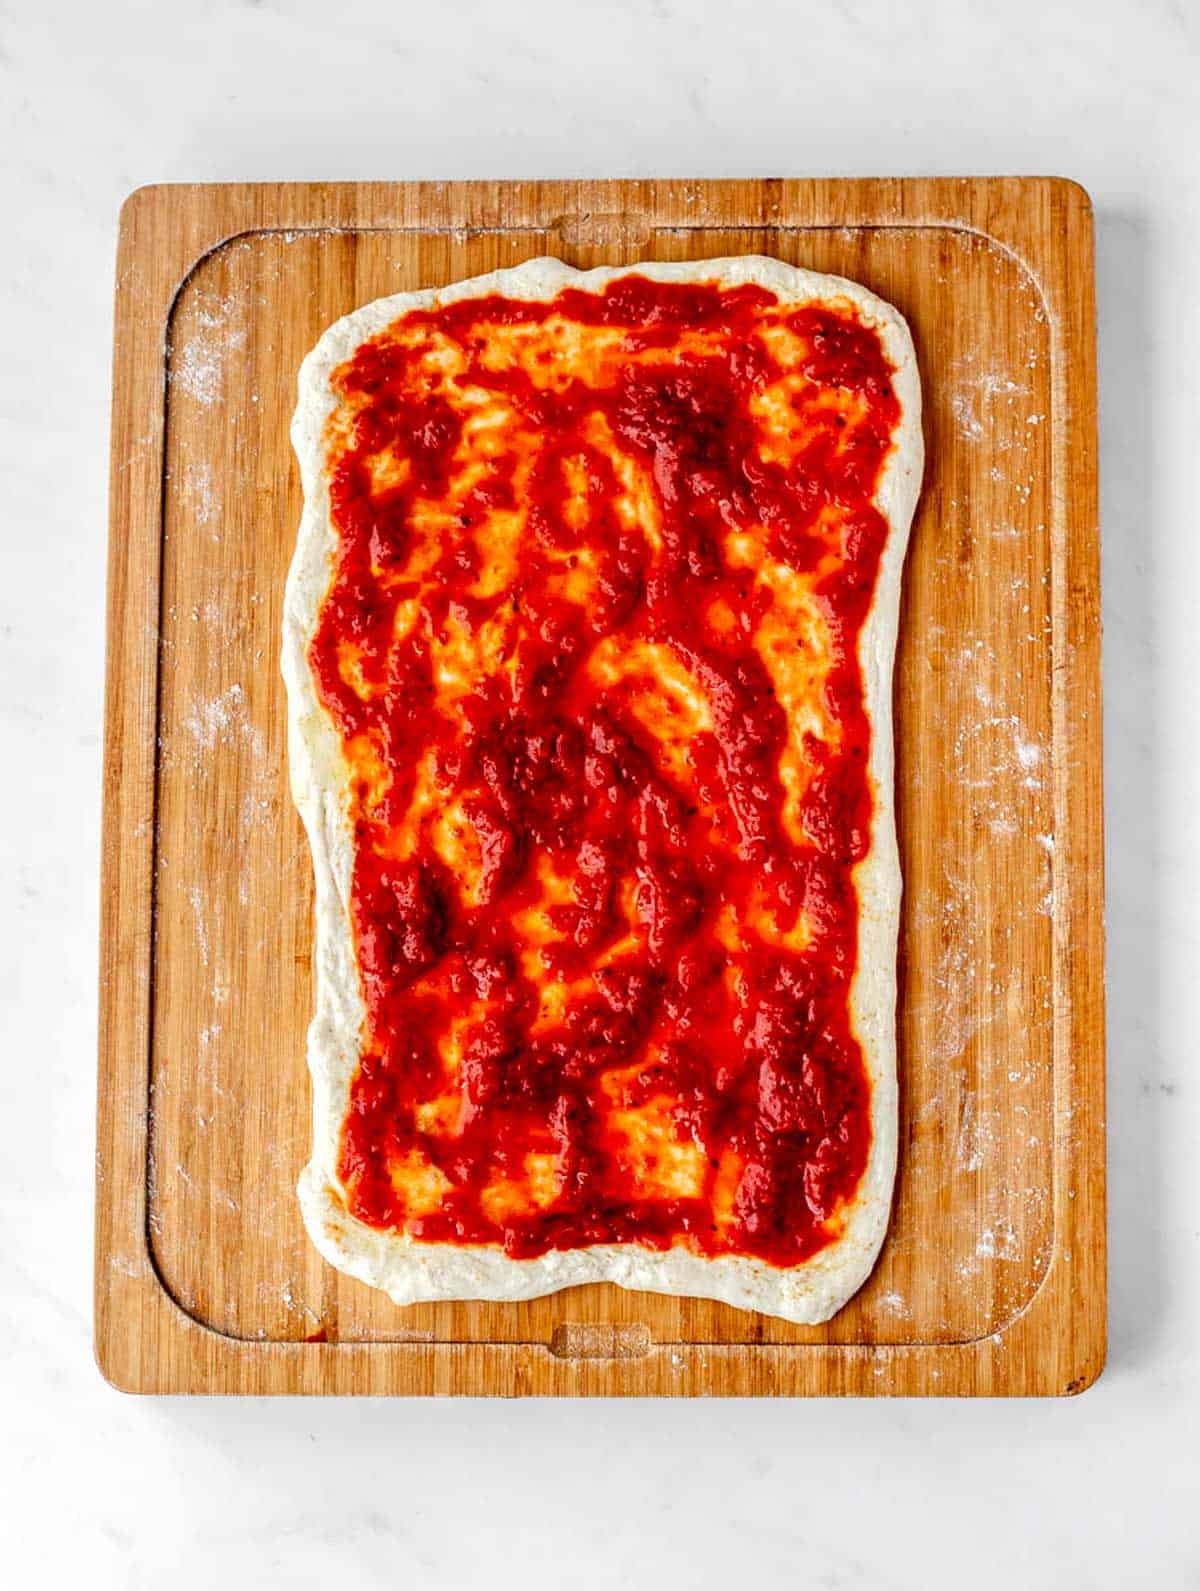 A layer of pizza sauce on top of the rolled out dough on a cutting board.